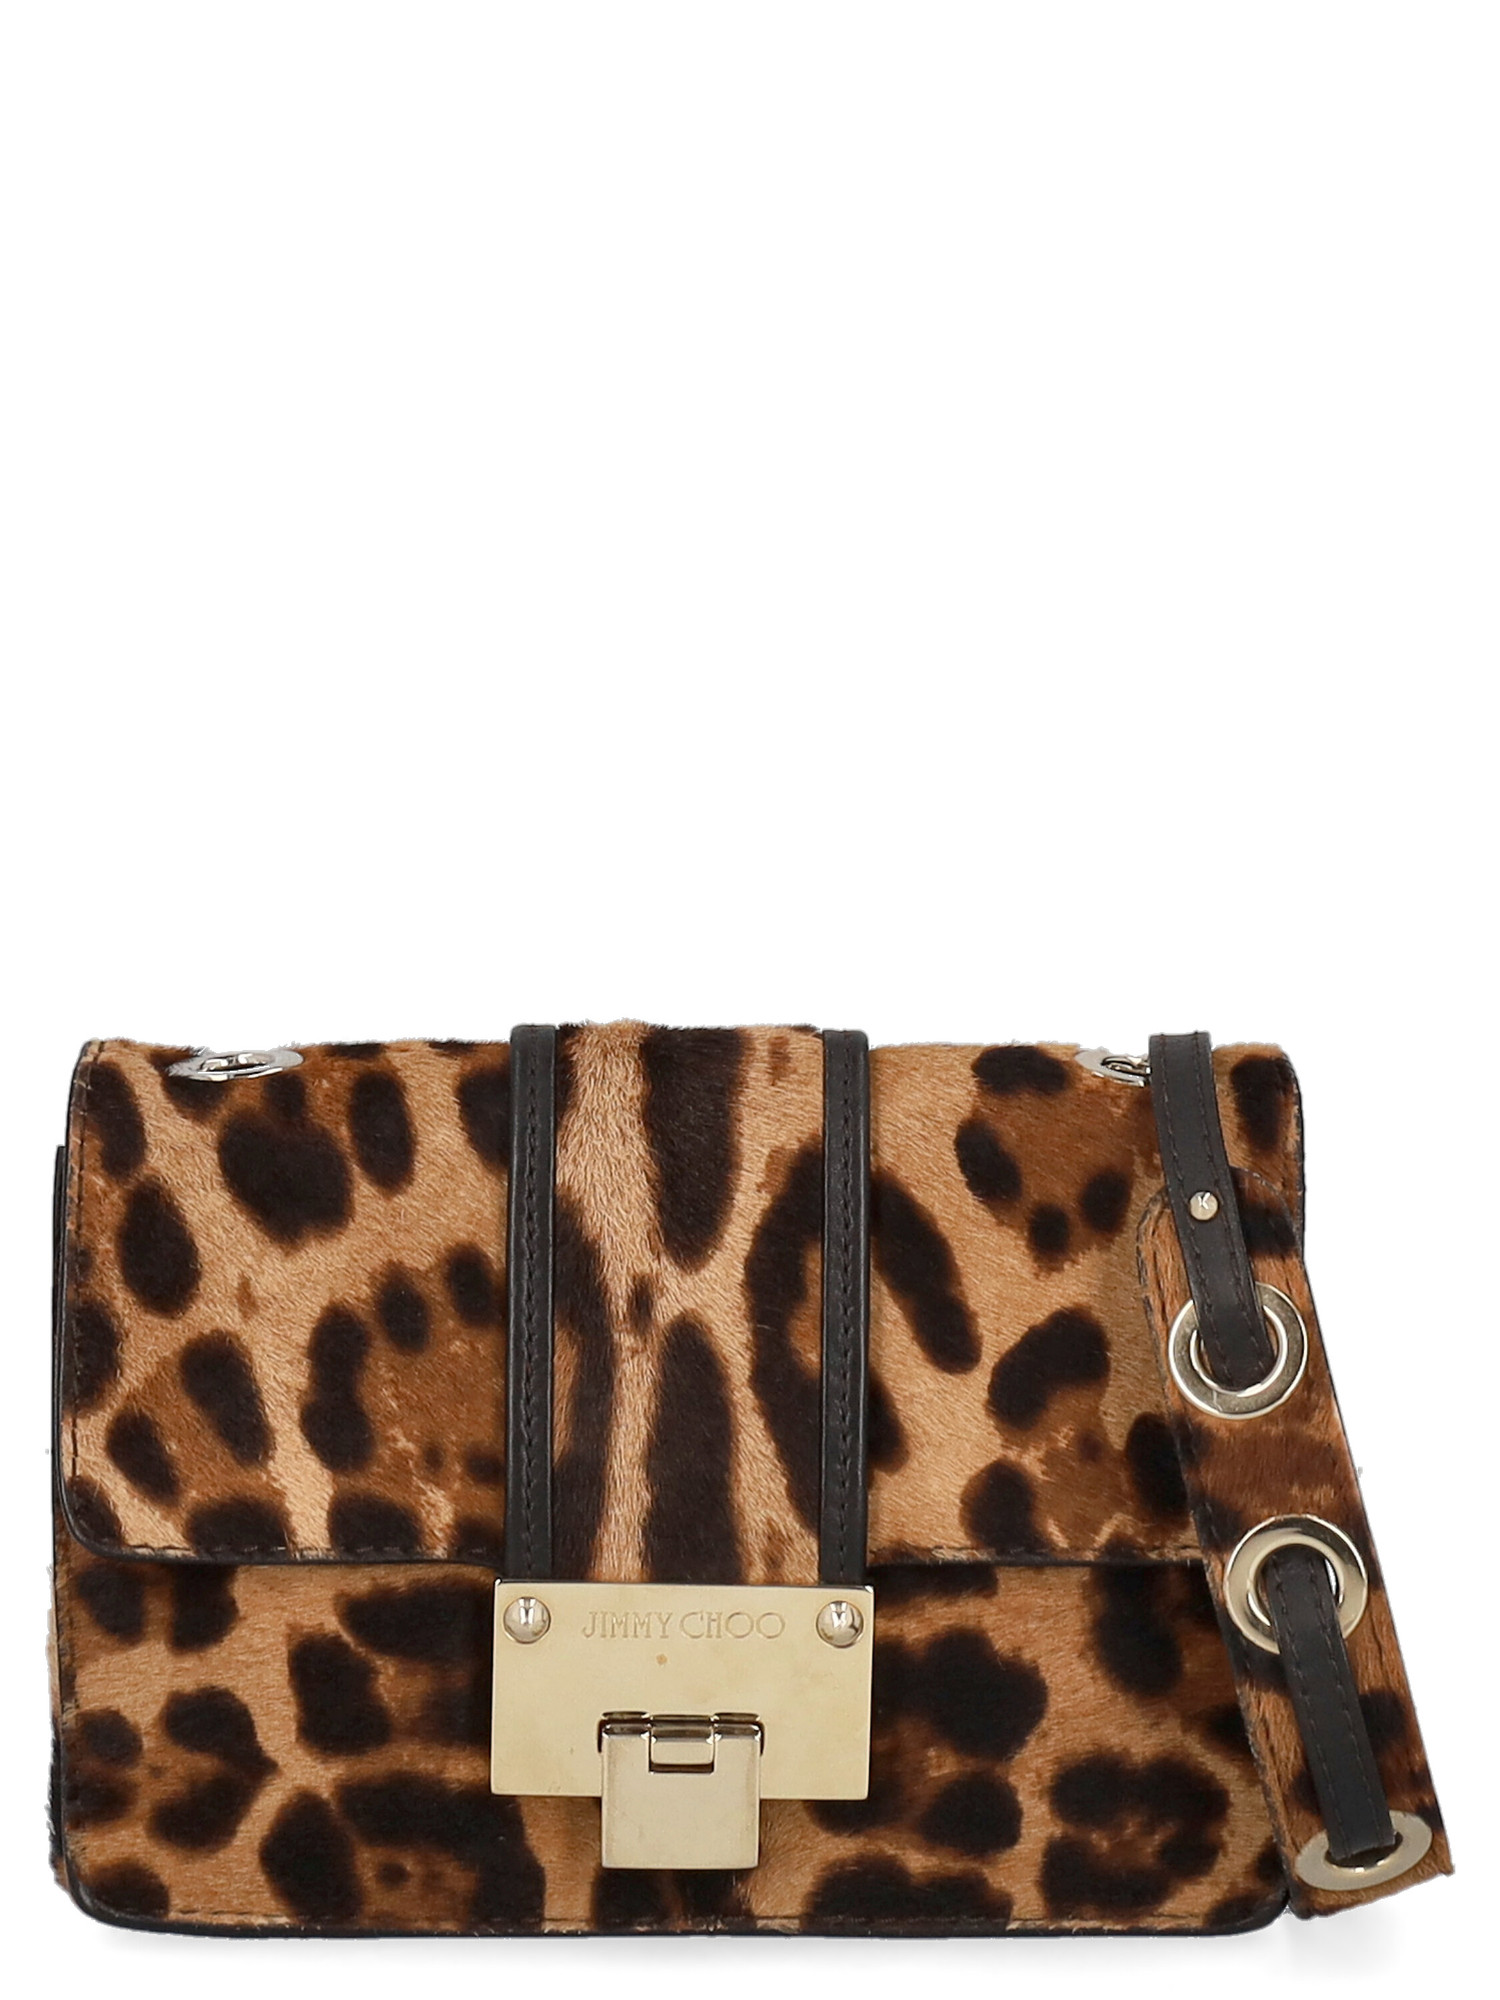 Condition: Good, Animal Print Leather, Color: Black, Camel Color -  -  -